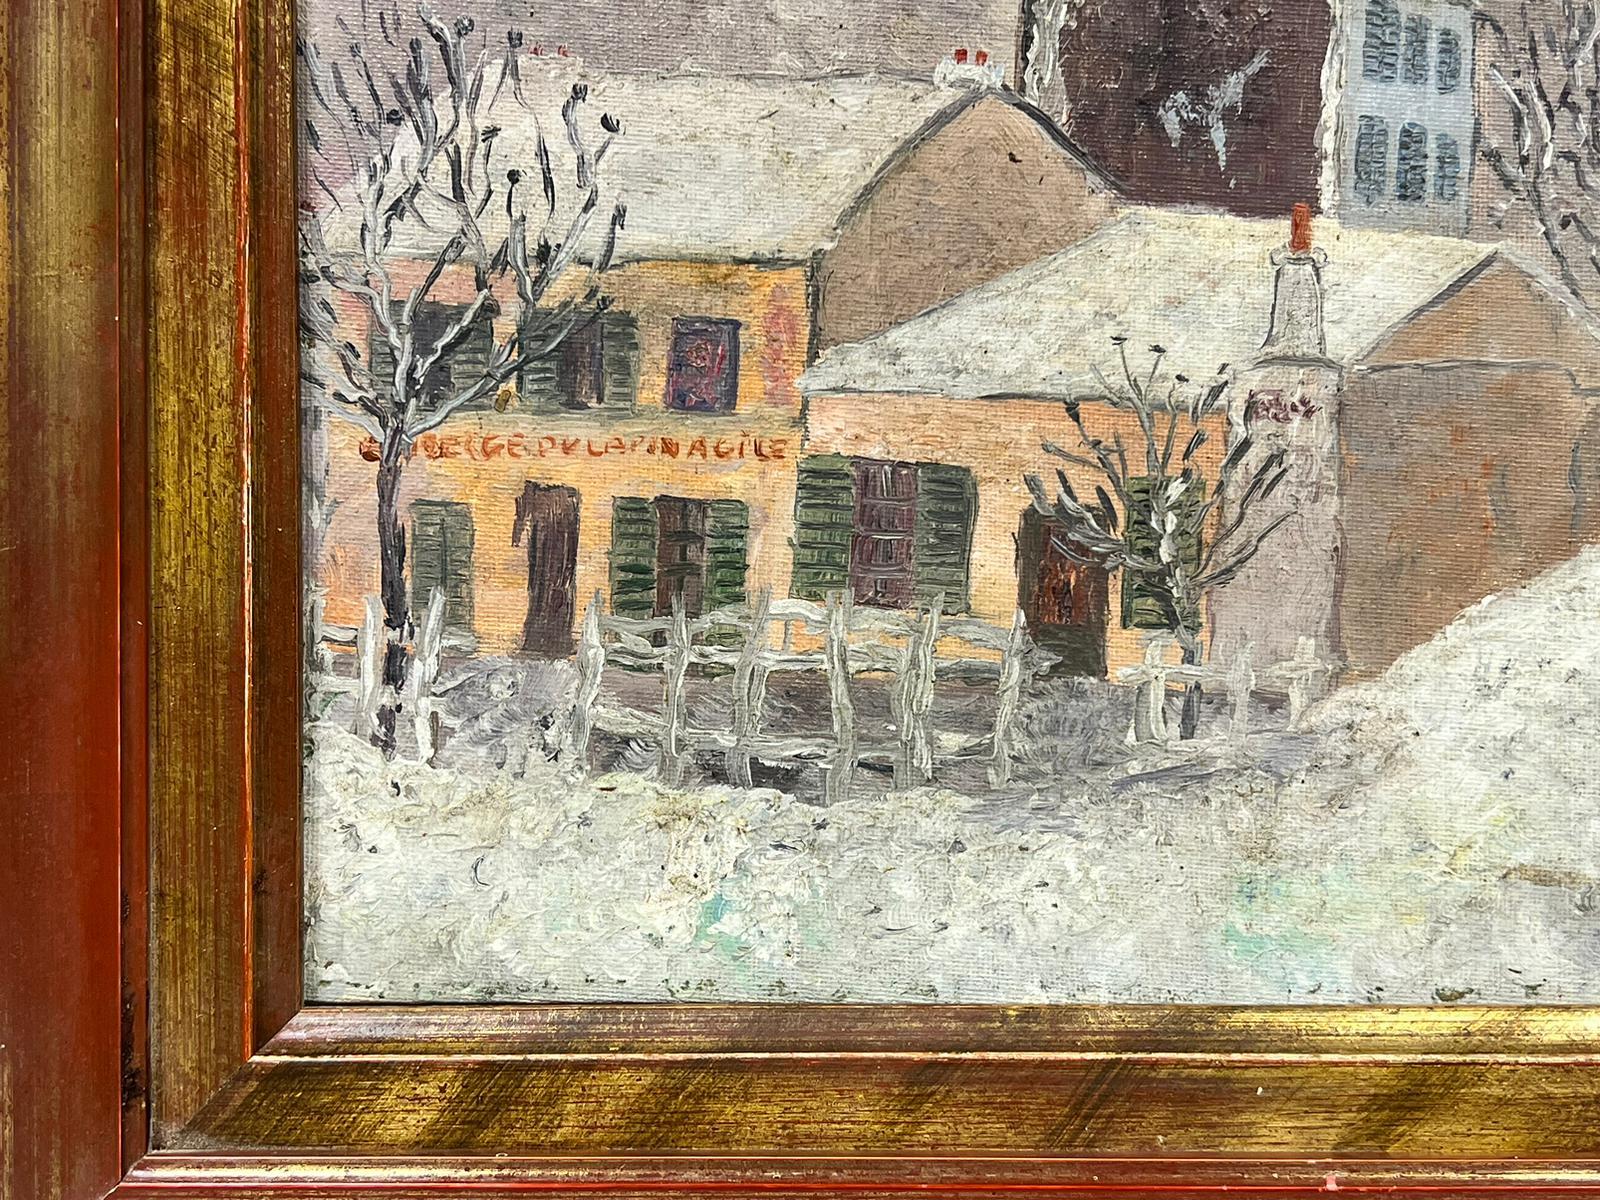 Montmartre Paris in Snow Latin Agile Street Scene Signed French Oil 20thC For Sale 1